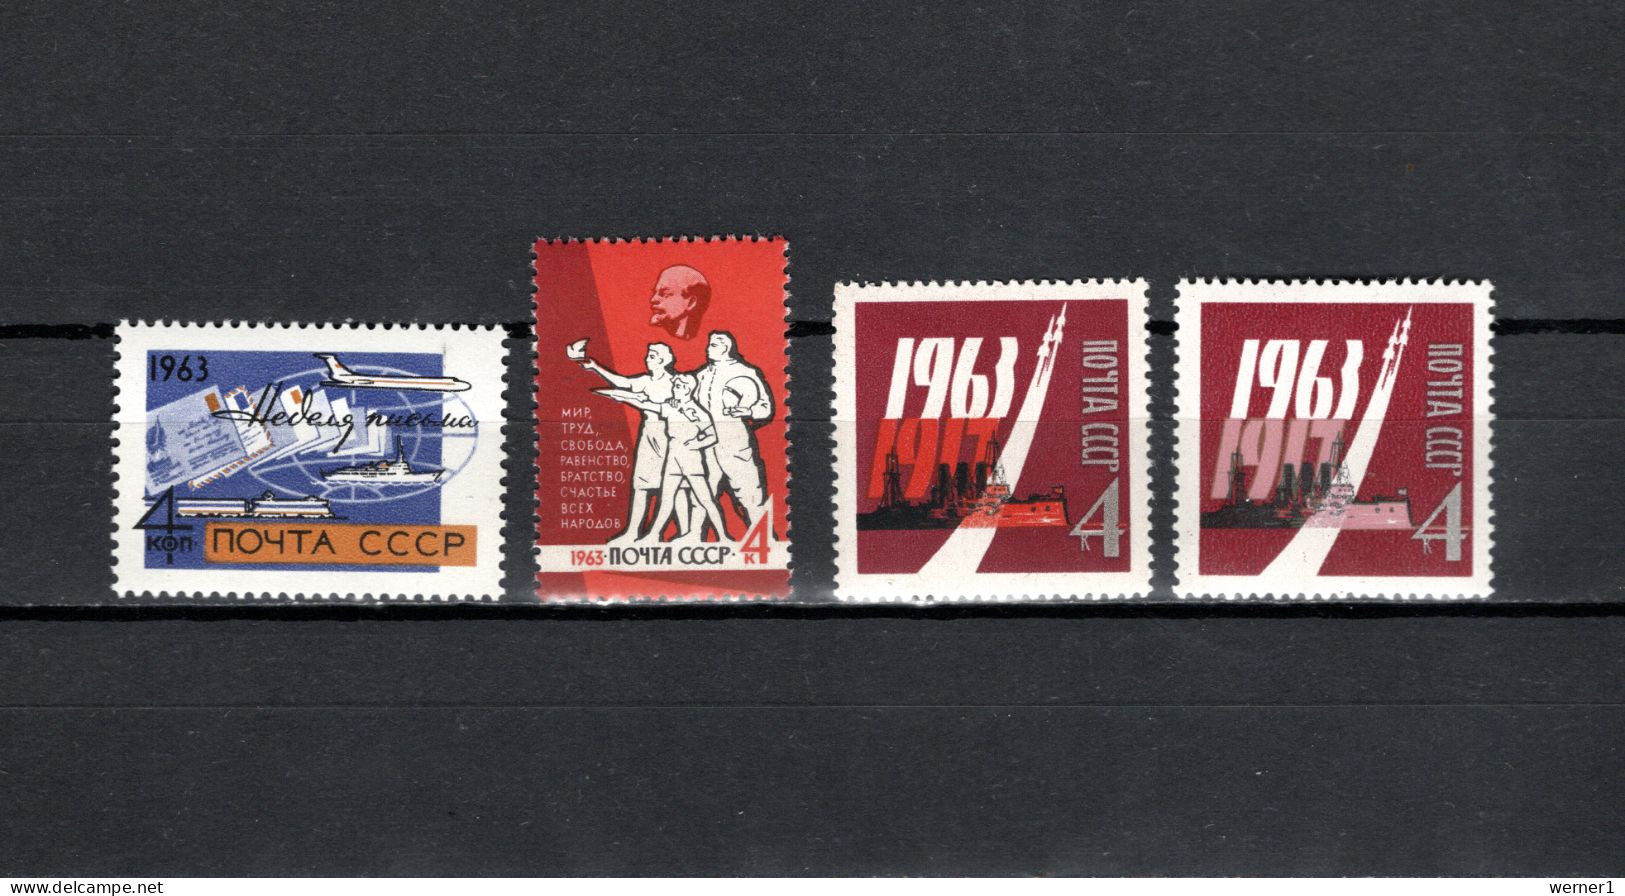 USSR Russia 1963 Space, Letter Week, Cosmonaut, October Revolution 46th Anniv. 4 Stamps MNH - Russia & URSS